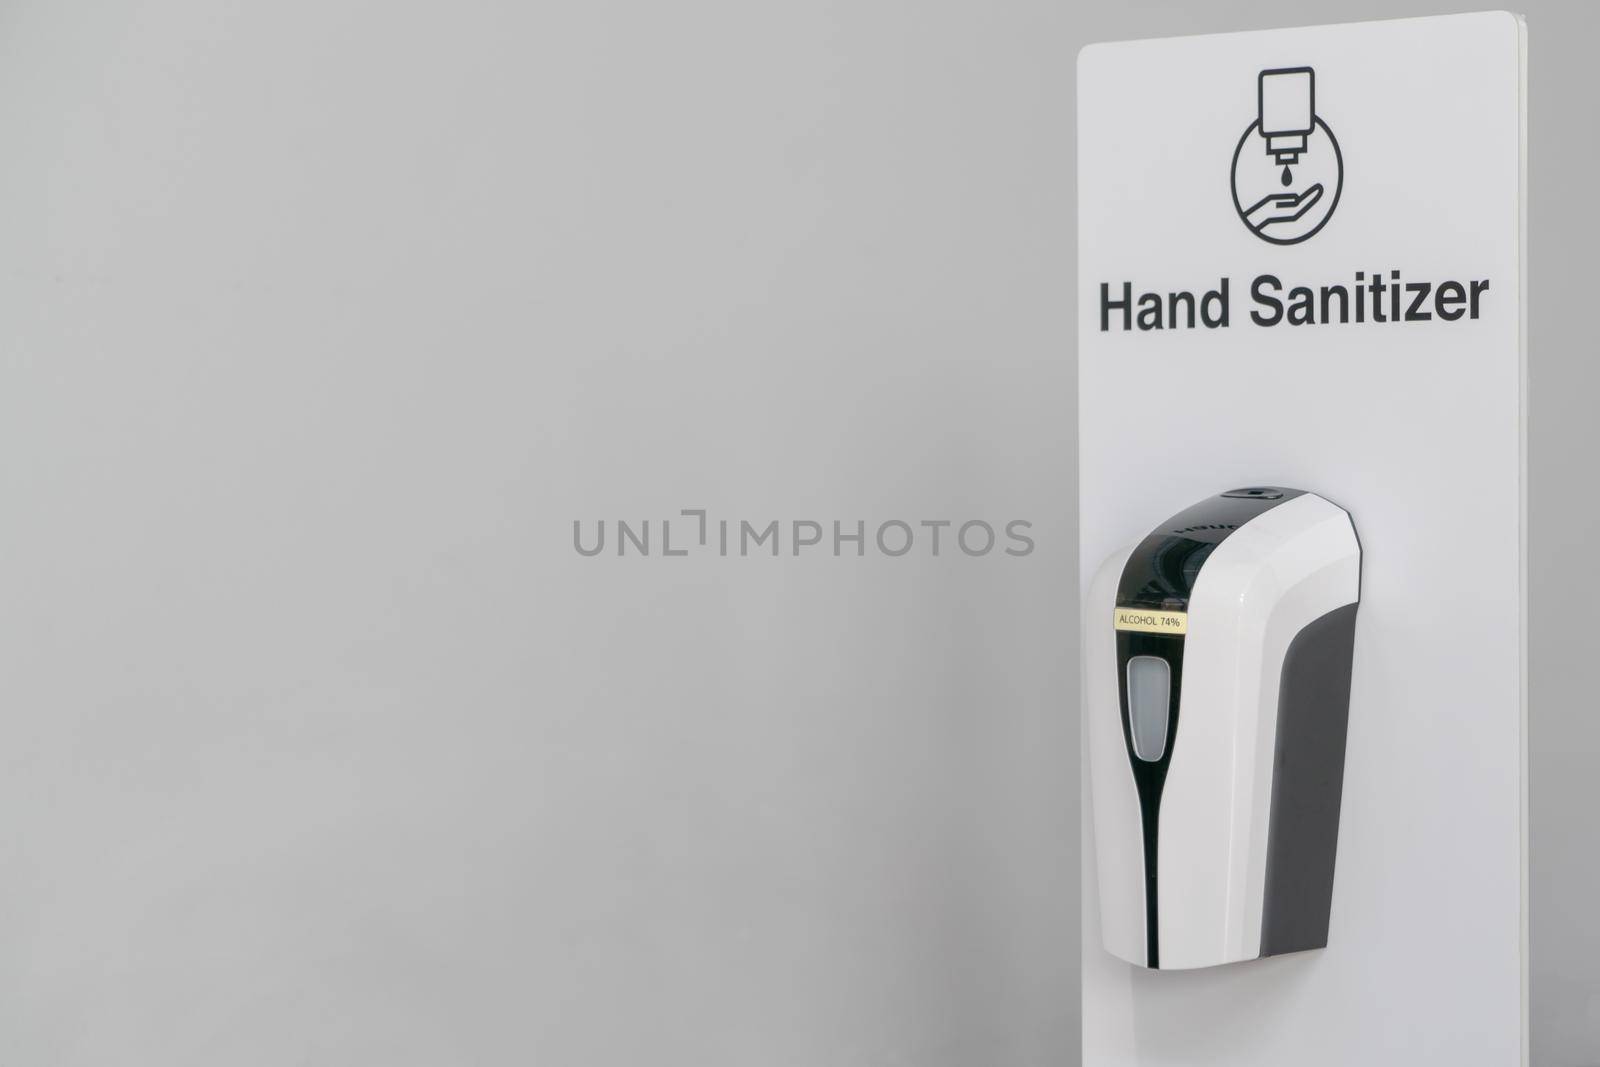 Automatic alcohol dispenser. Sanitation station for cleaning of hands.